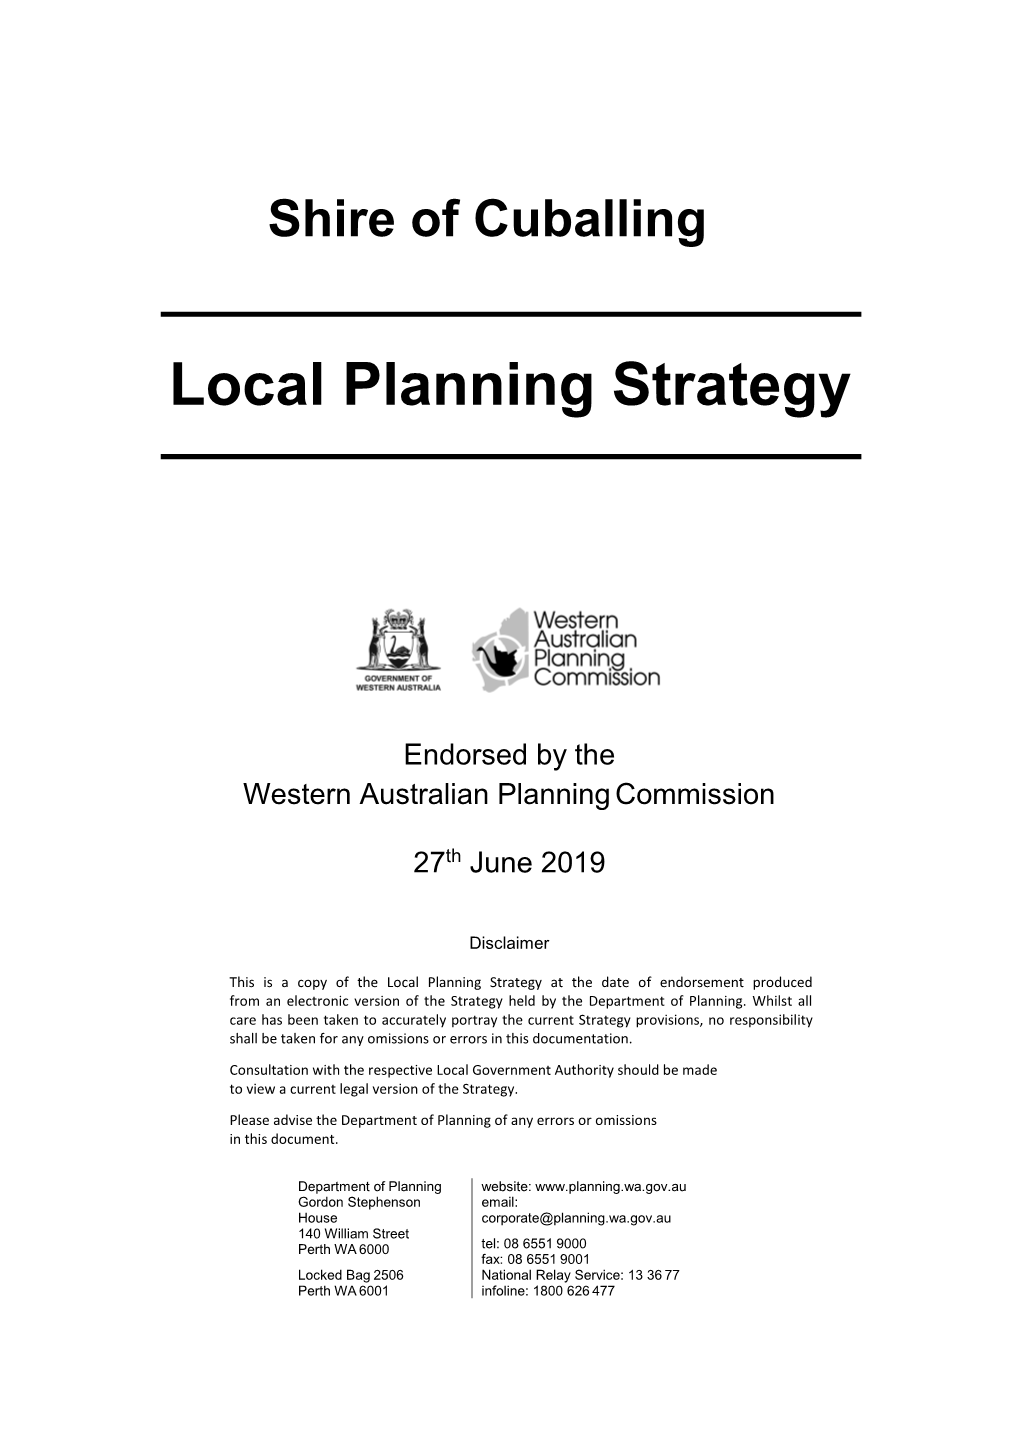 Local Planning Strategy